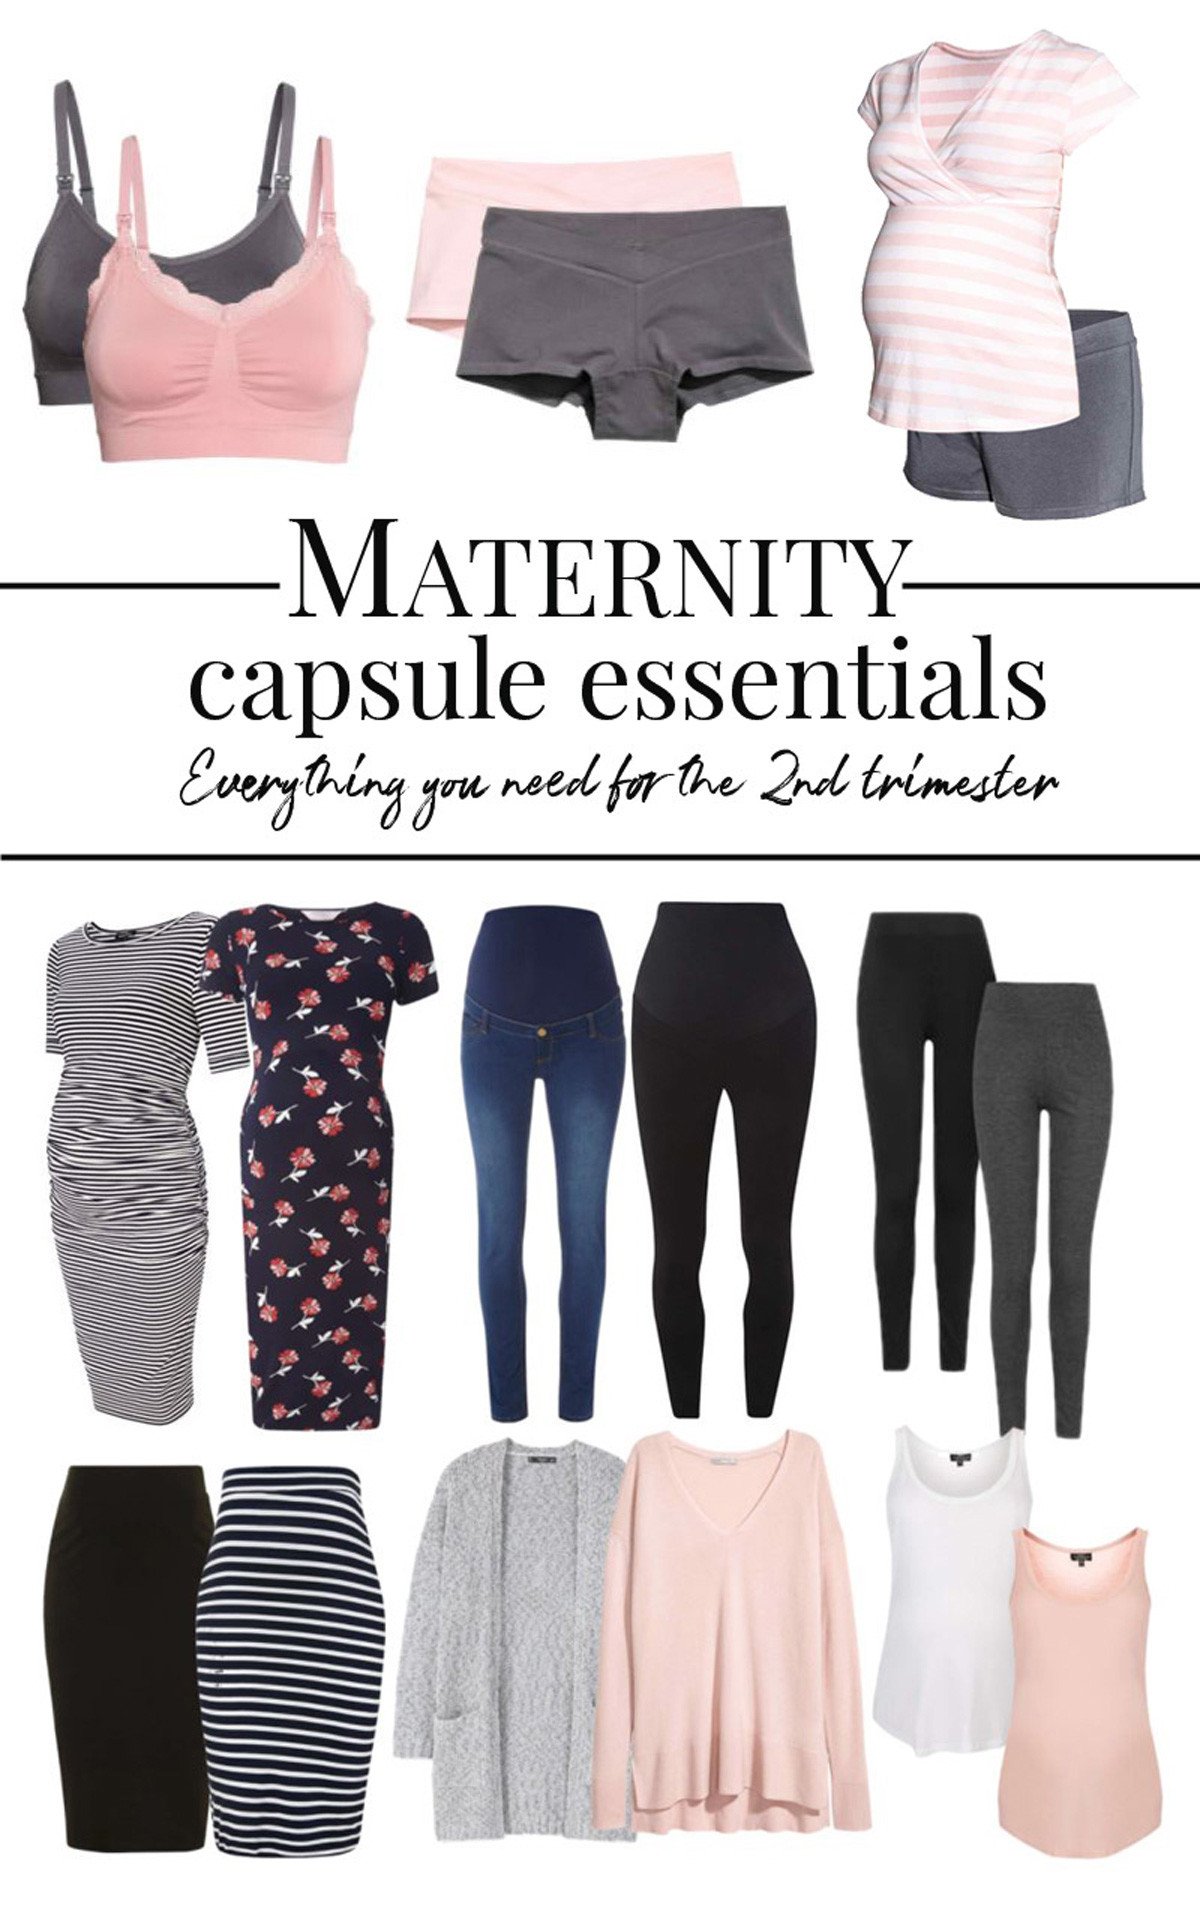 maternity essentials: a small capsule wardrobe for pregnancy and beyond